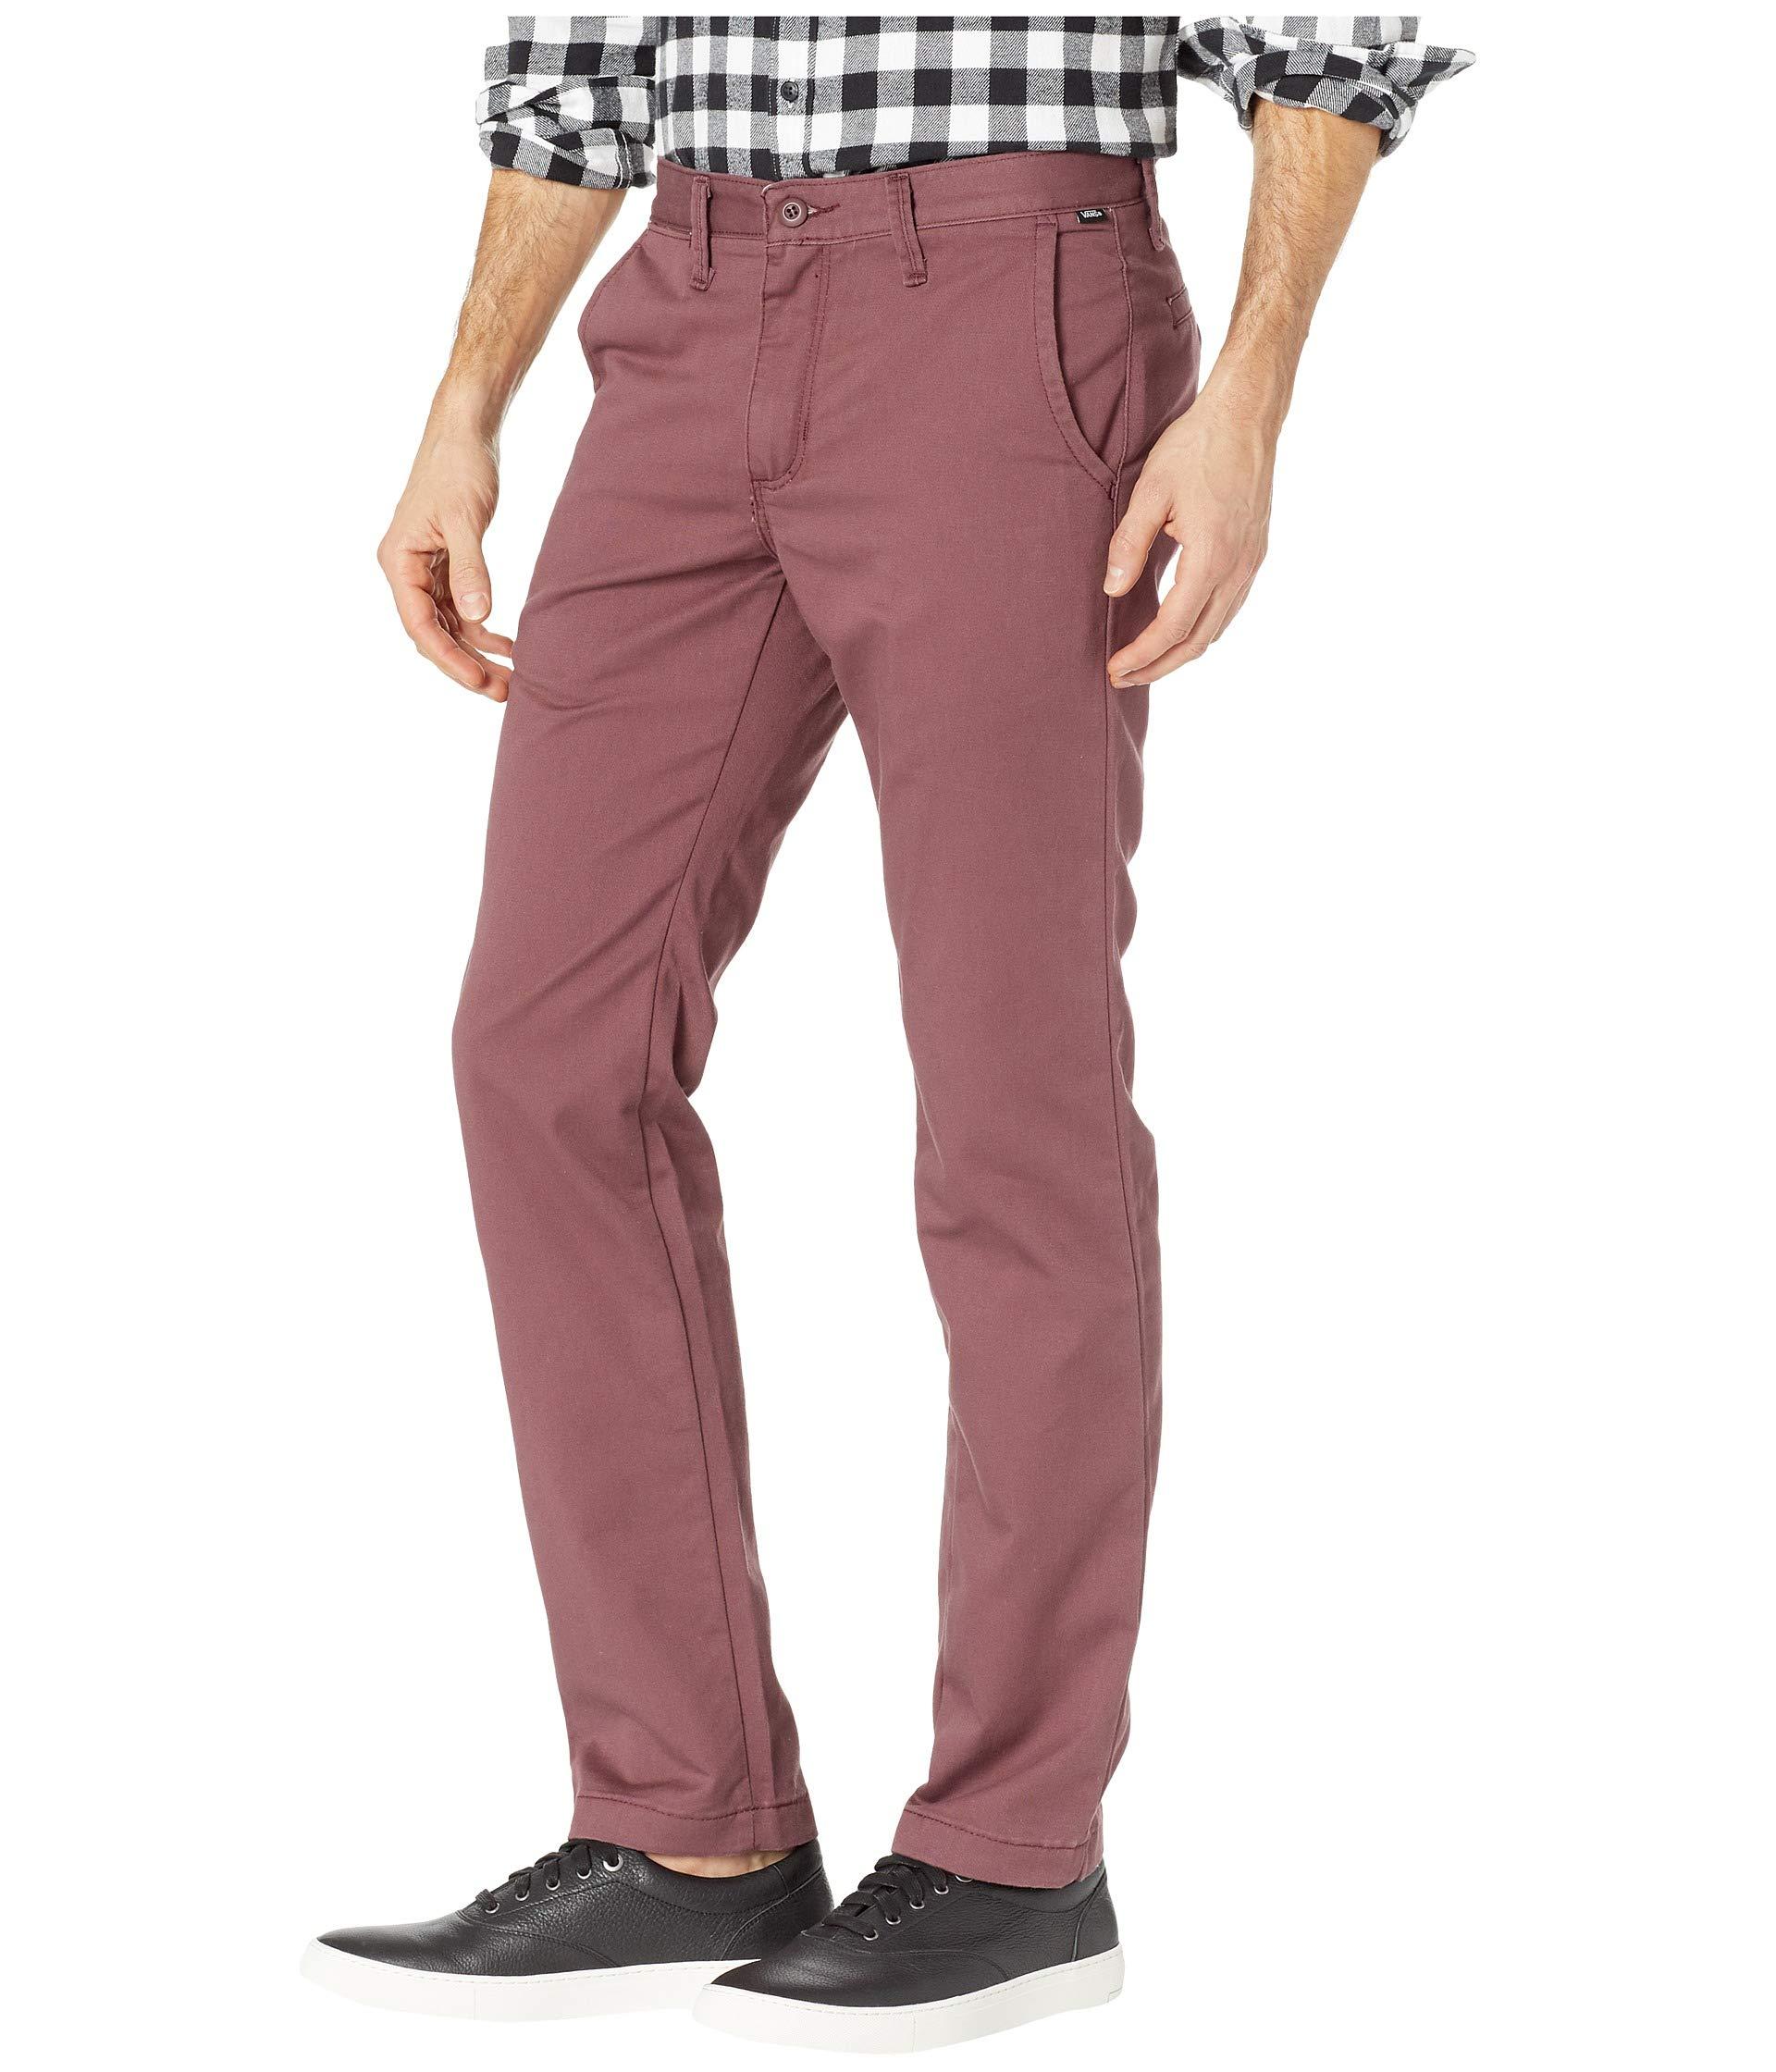 Vans Cotton Authentic Stretch Chino Pants in Burgundy (Red) for Men - Lyst